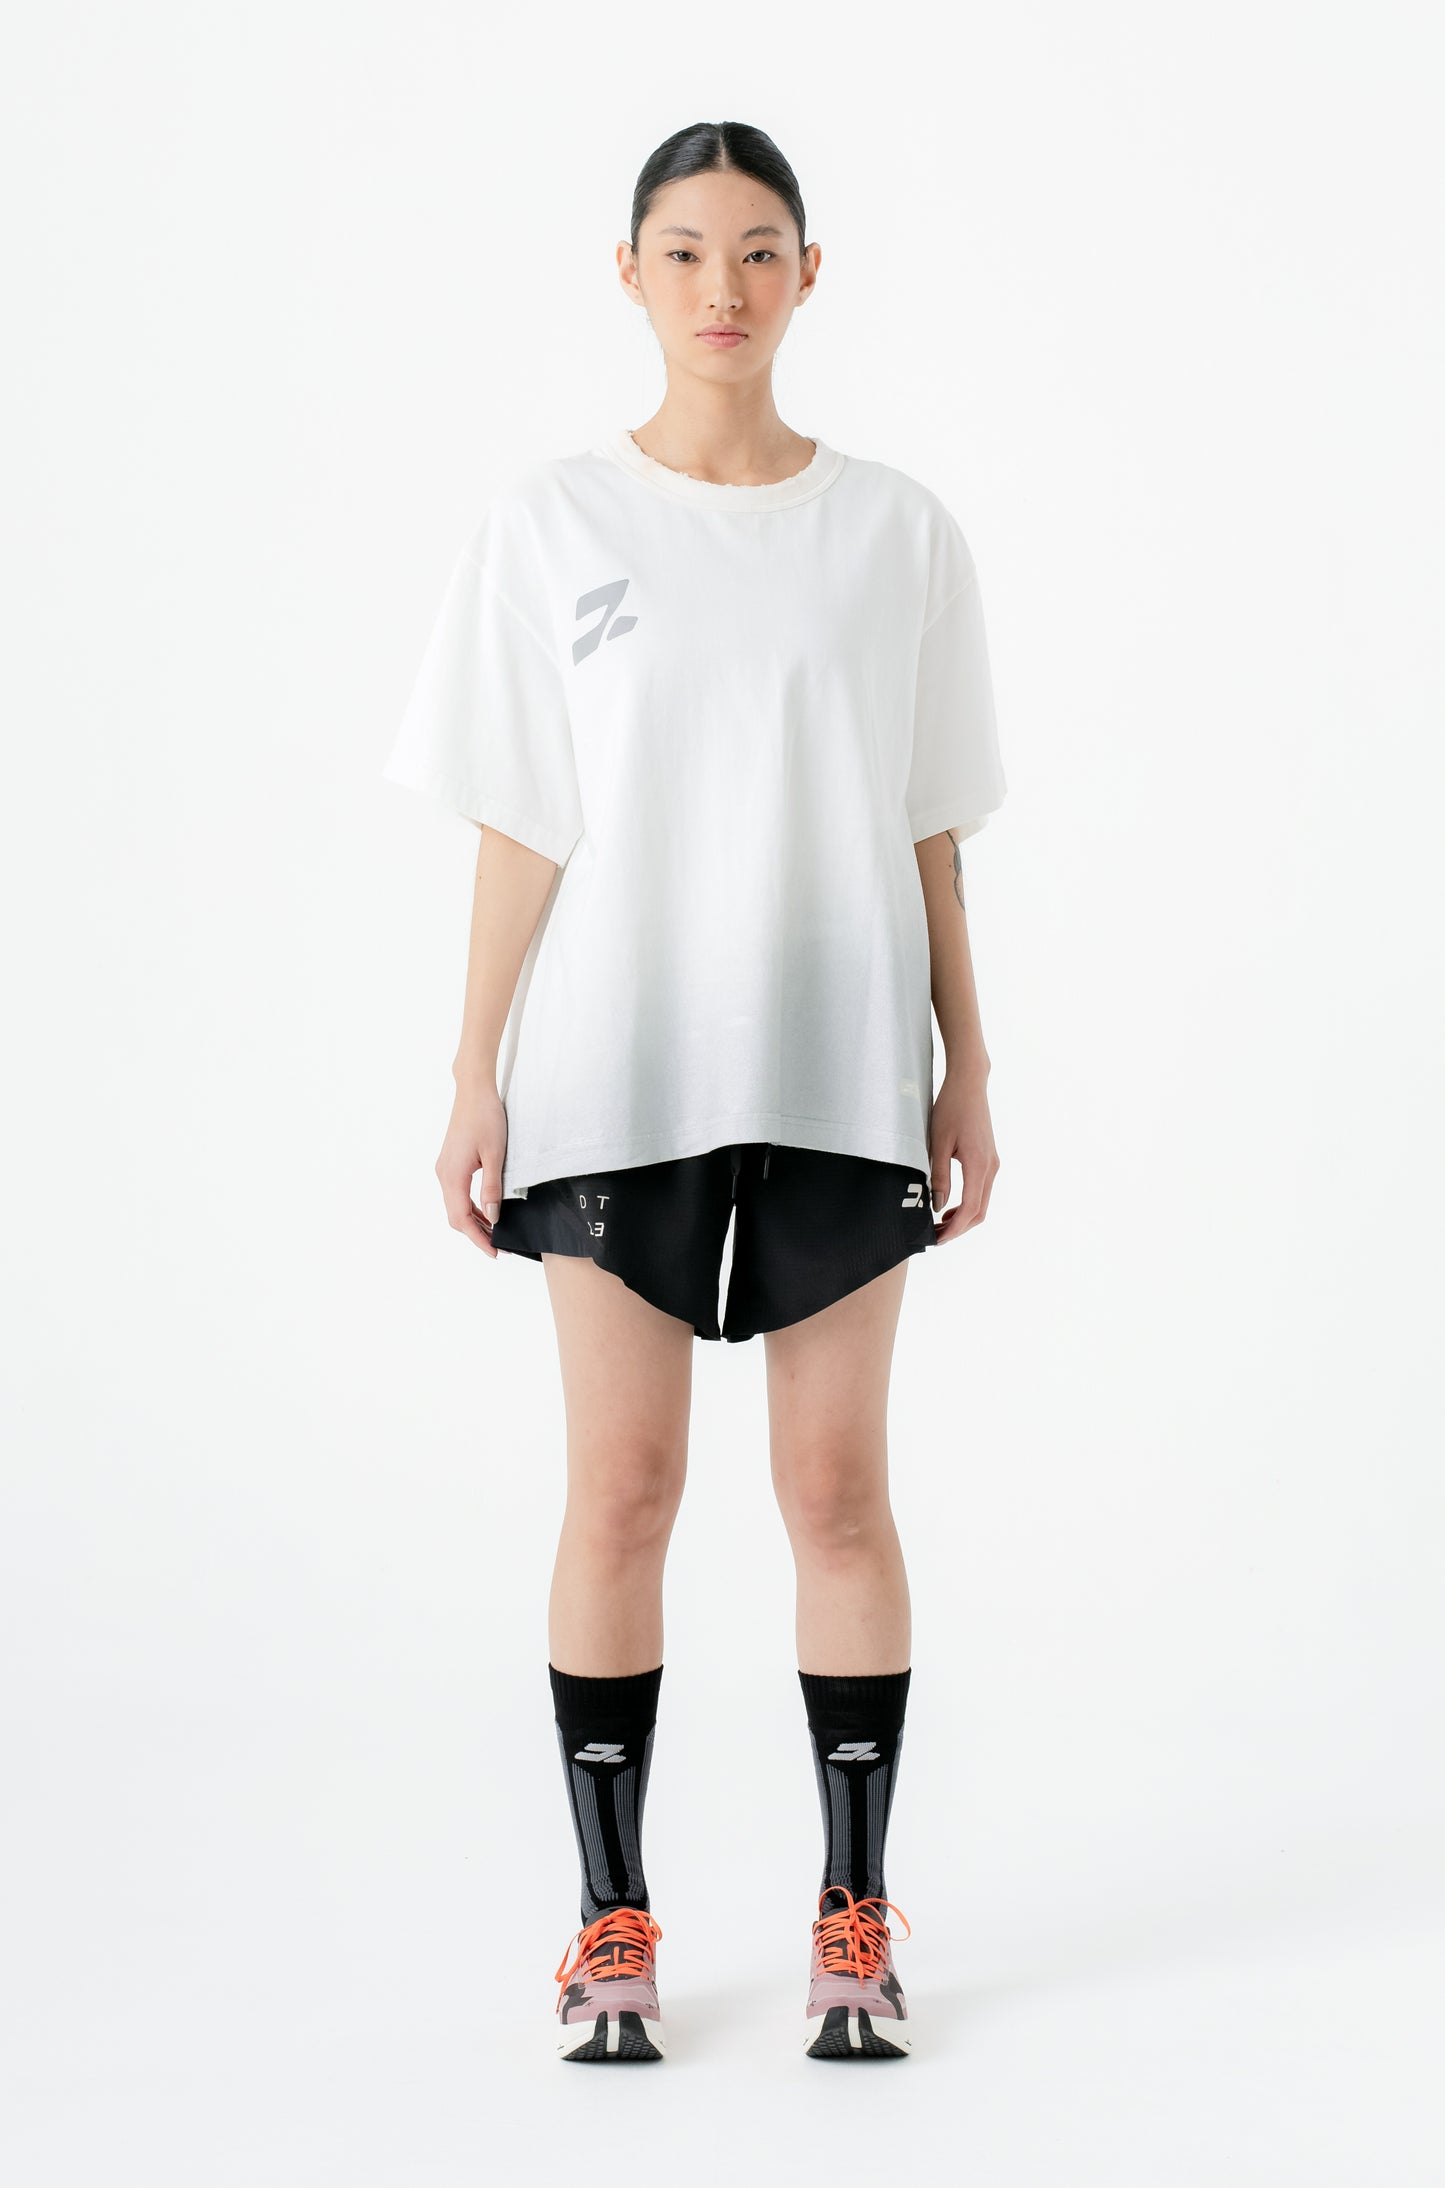 PACE - DT2 Laser Tee "Off White"